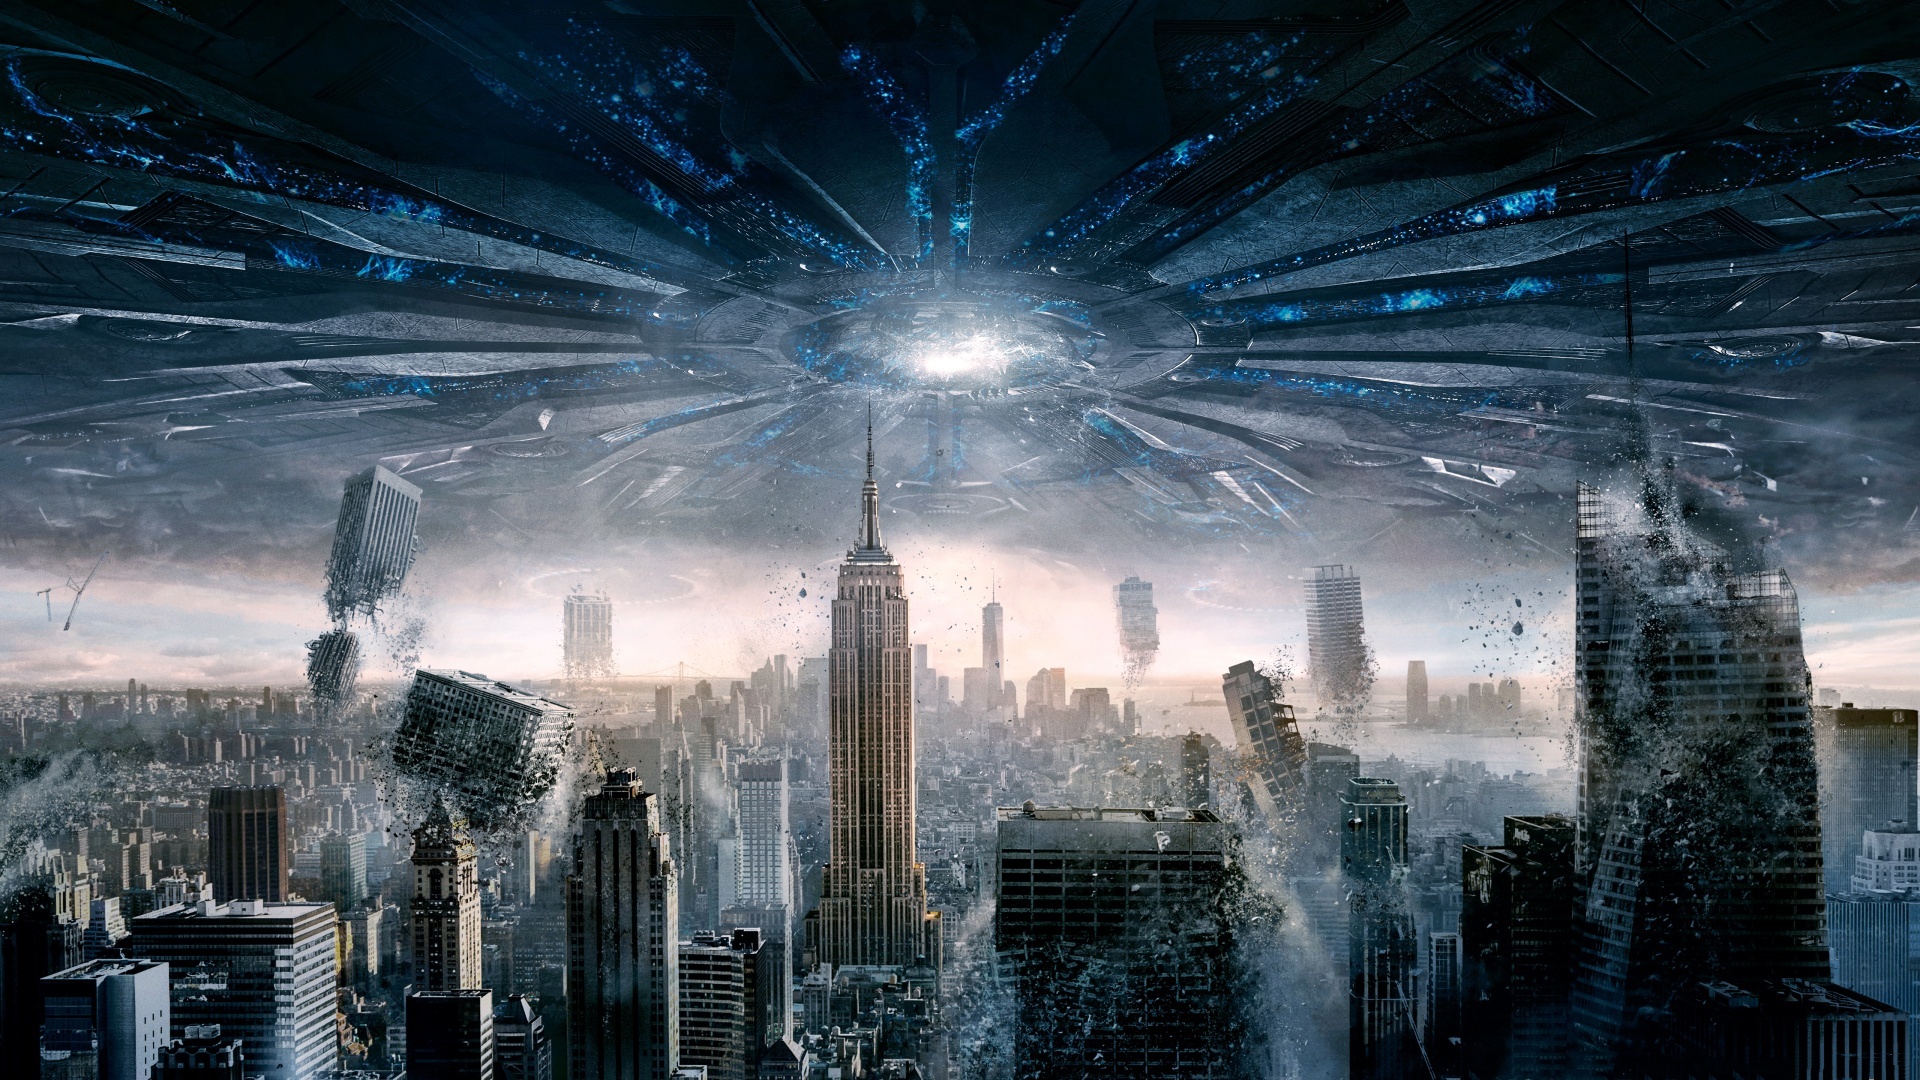 Download background movie, independence day: resurgence, apocalypse, sci fi